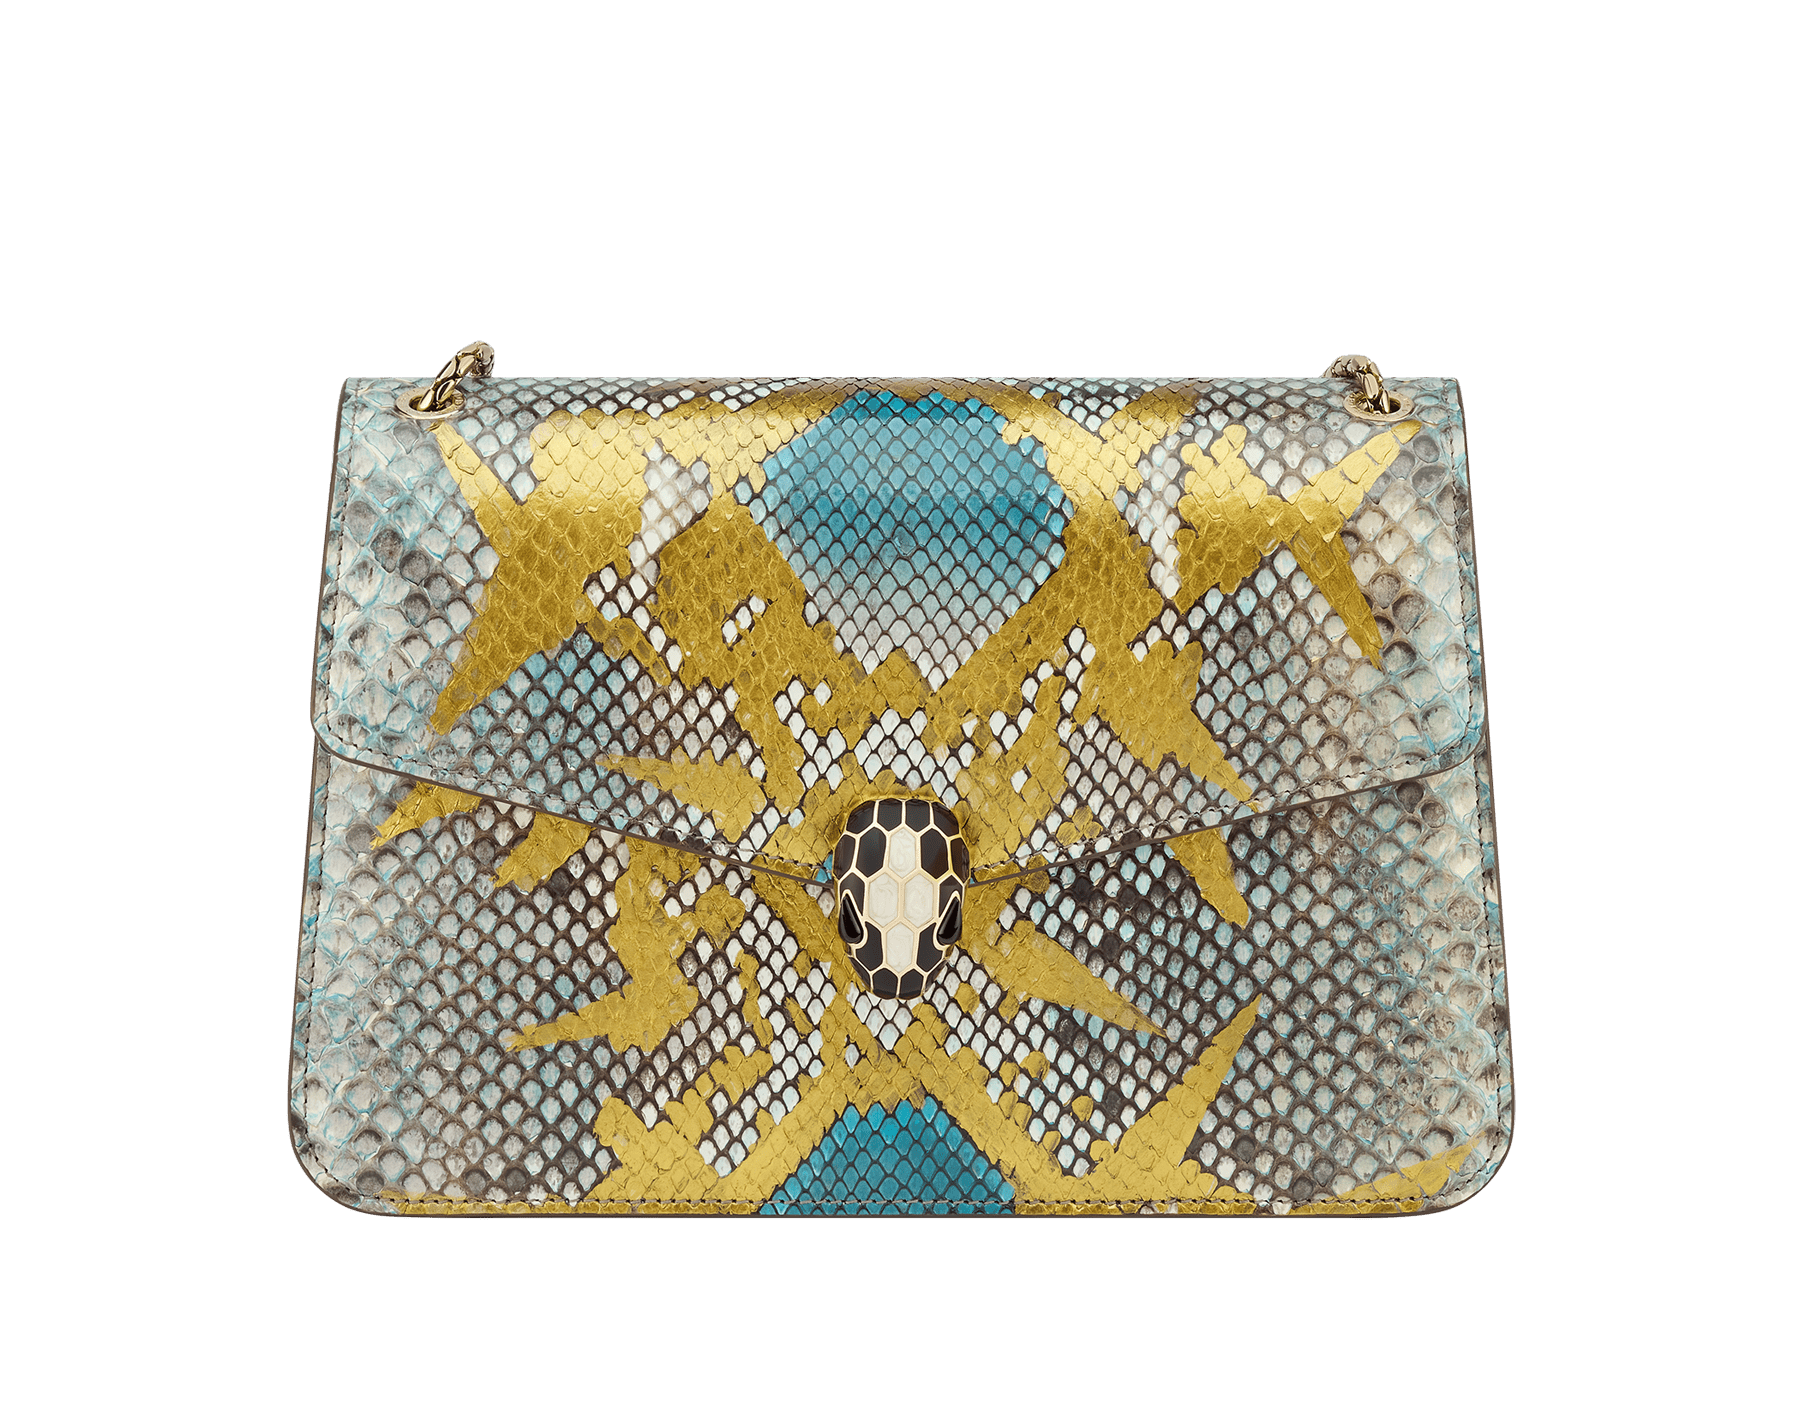 Serpenti Forever shoulder bag in multicolour Early Bright python skin with caramel topaz beige nappa leather lining. Captivating snakehead closure in light gold-plated brass embellished with black and caramel topaz beige enamel scales and black onyx eyes. 1140-P image 1